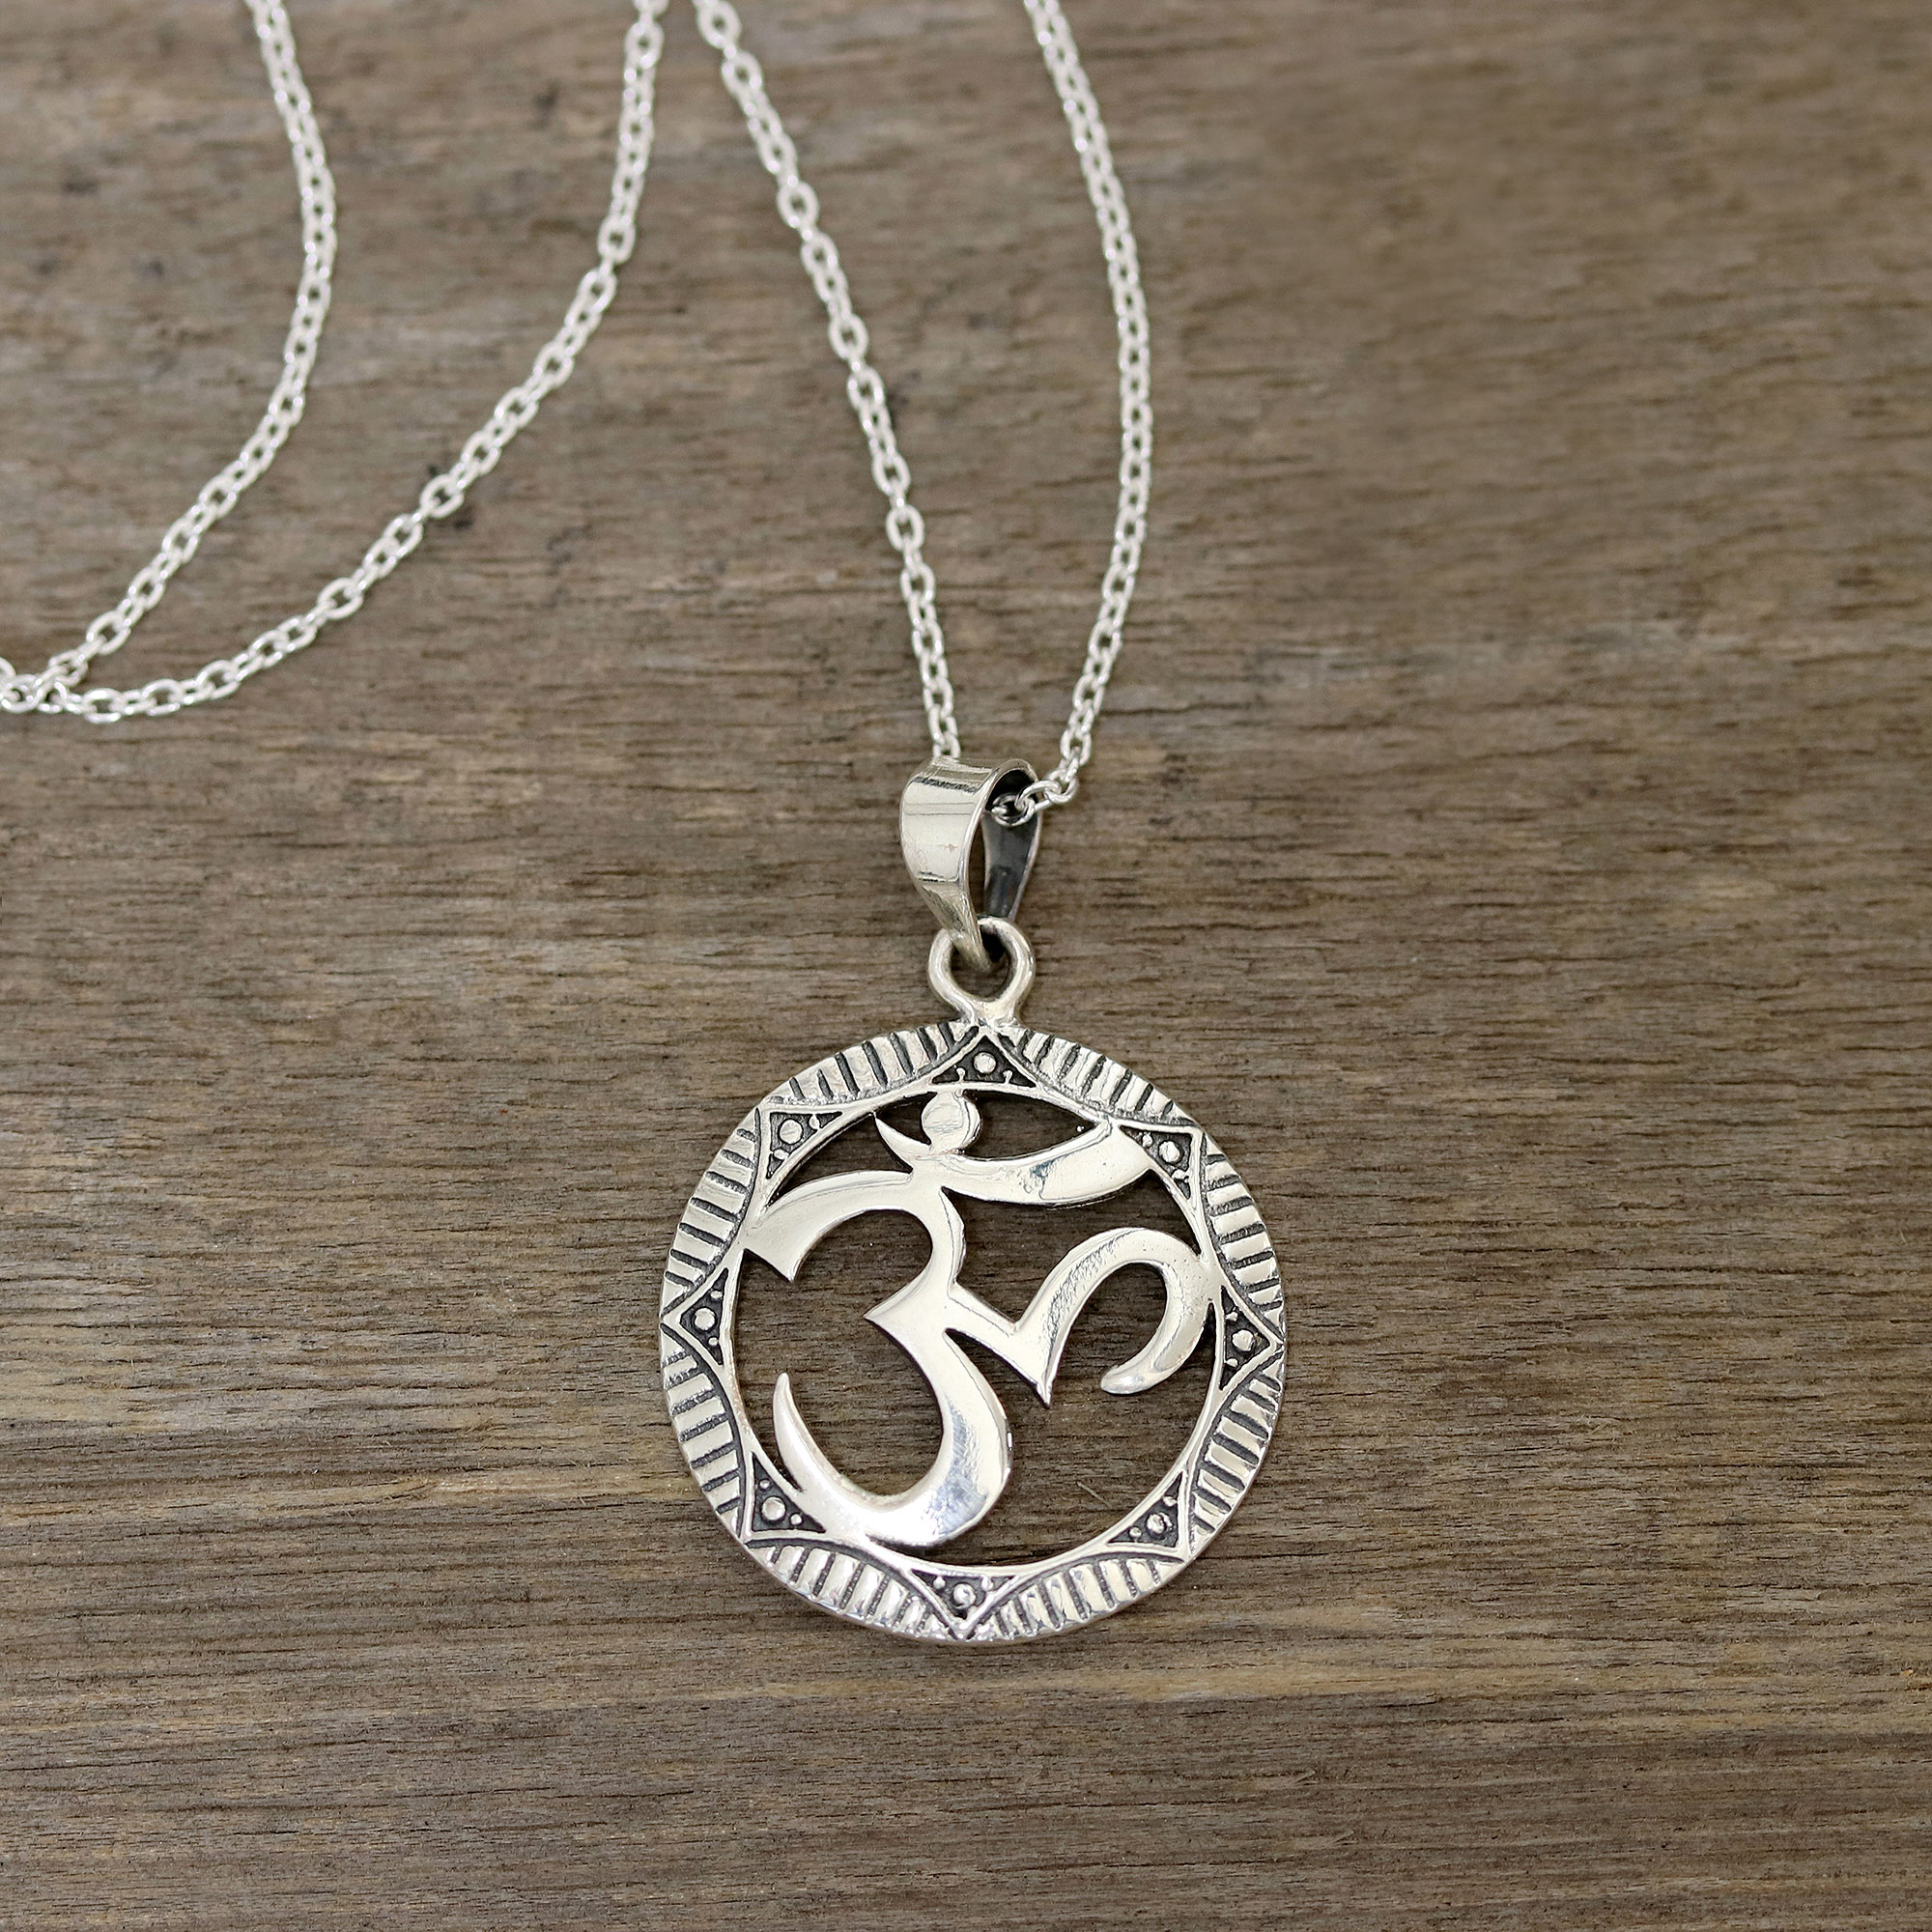 Sterling Silver Om Pendant Necklace from India - Meditative Medallion ...